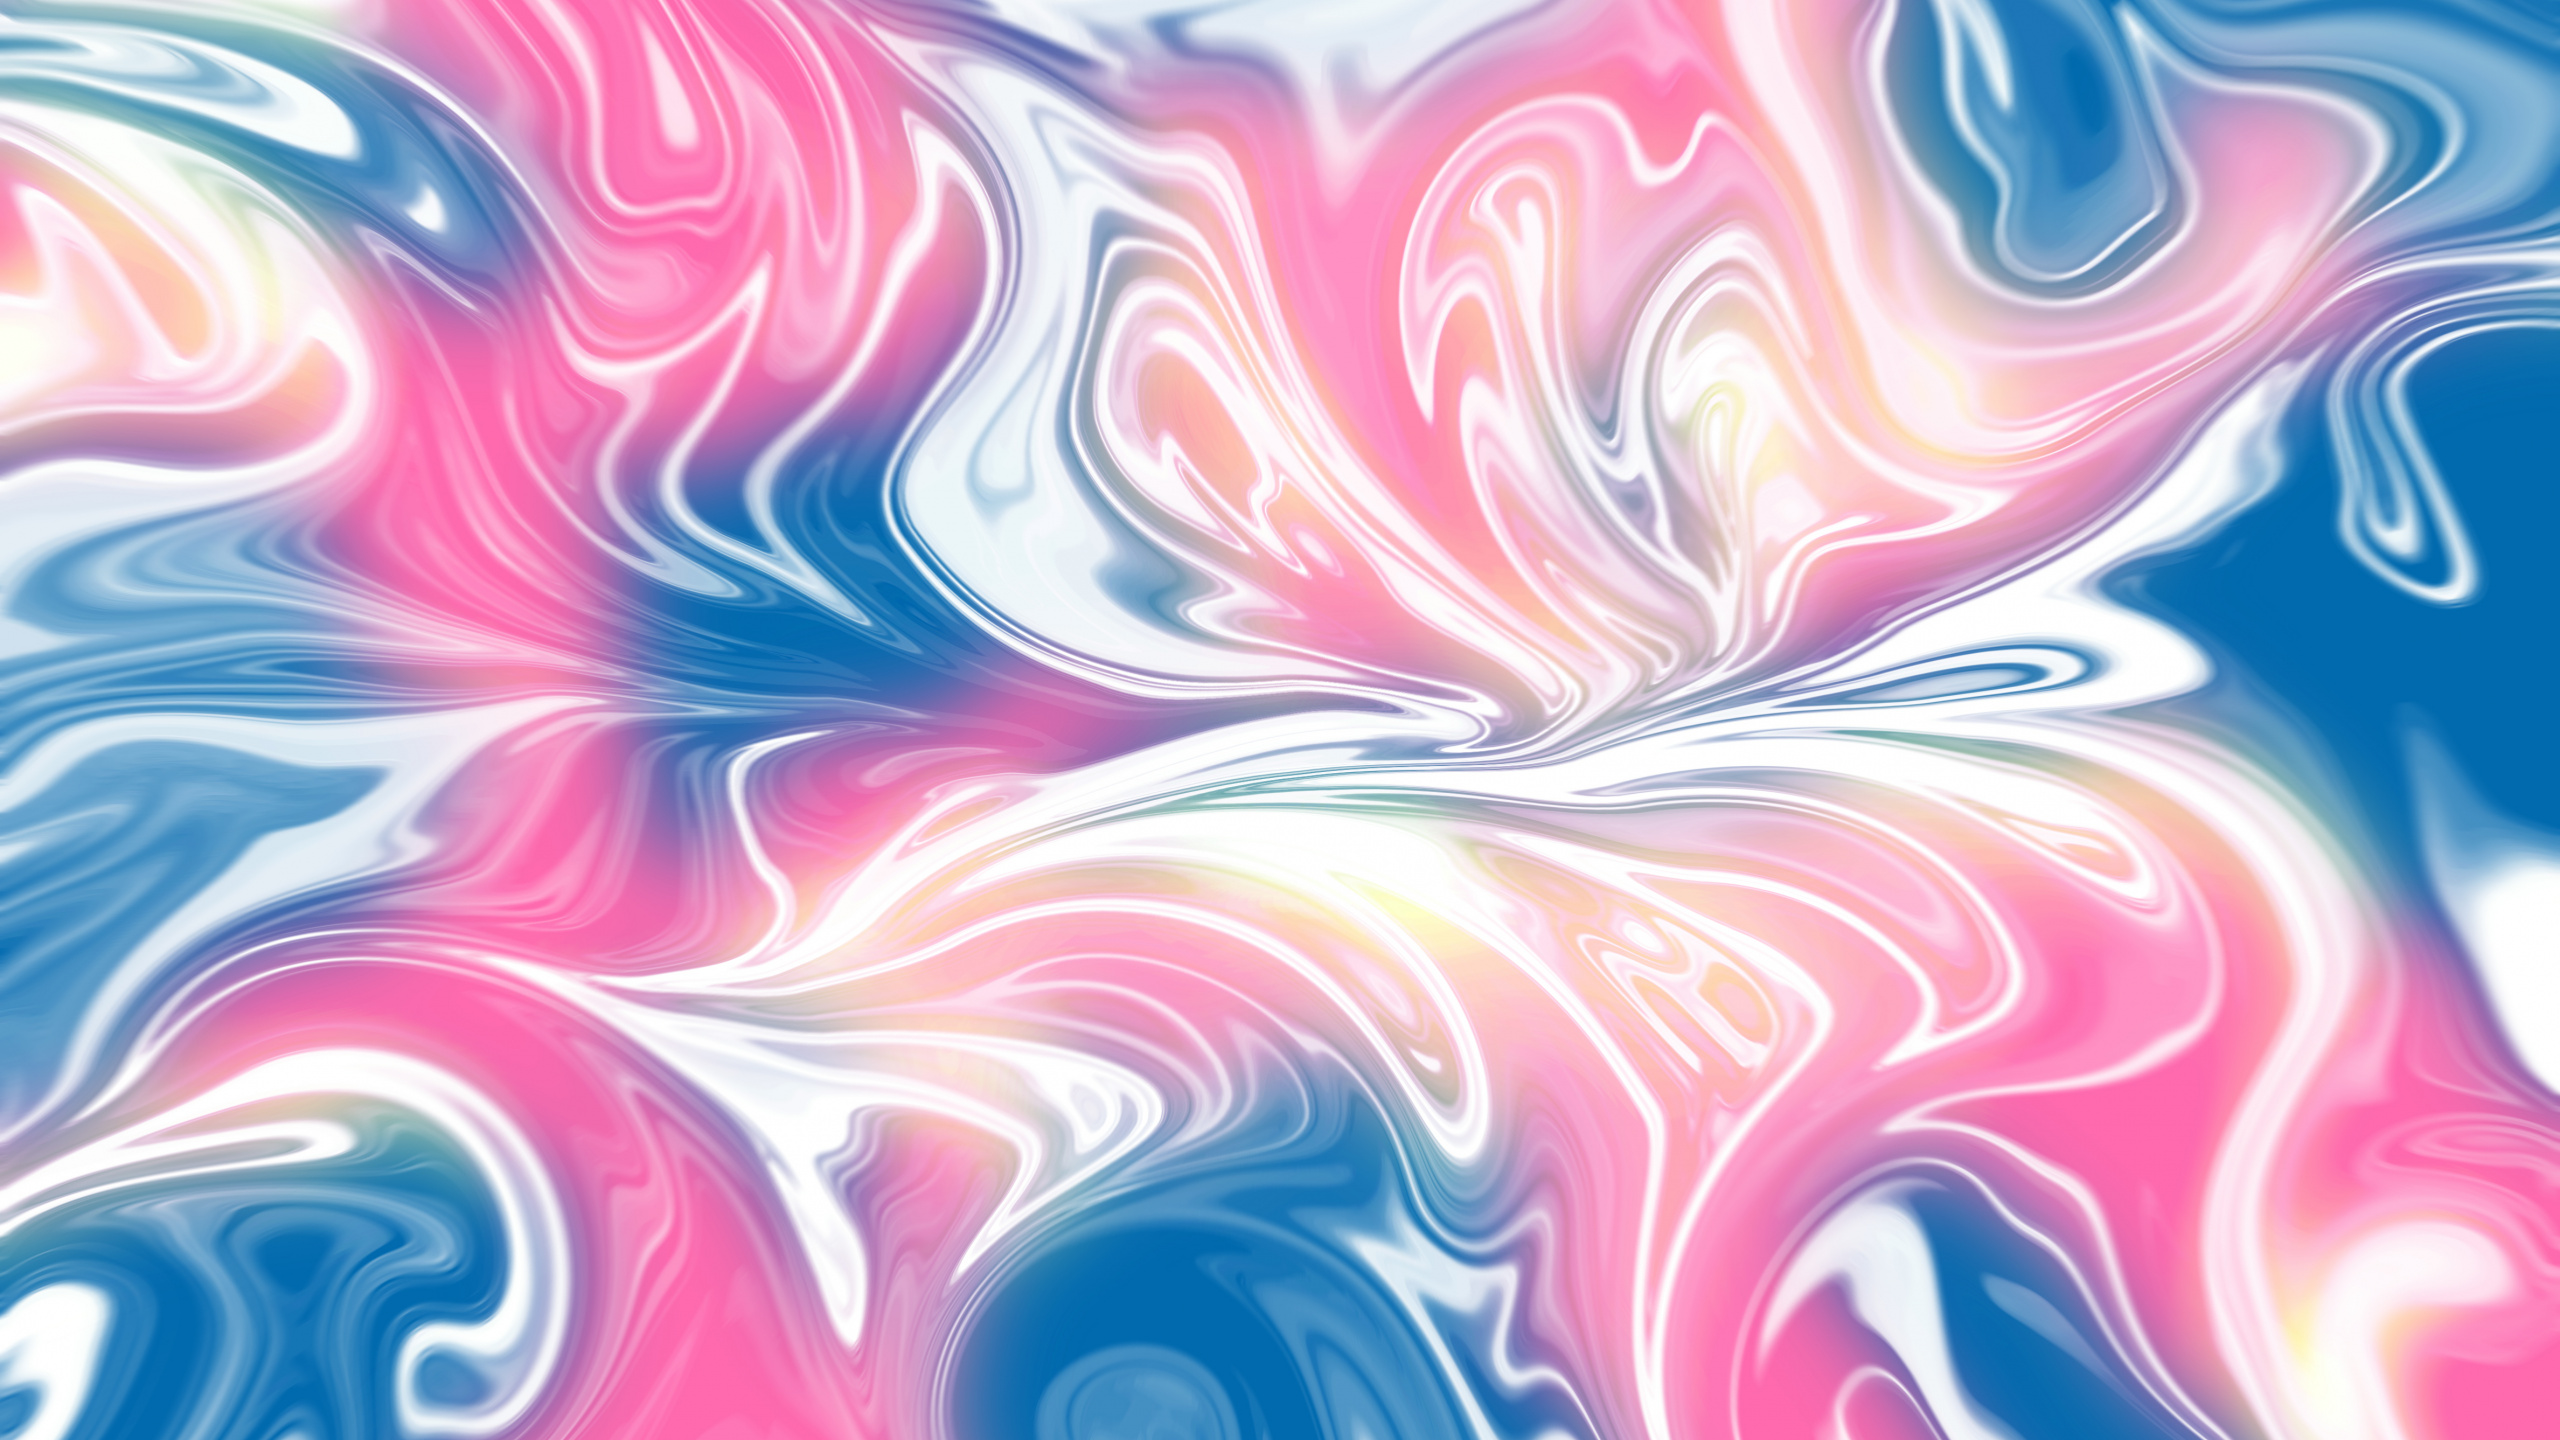 Pink White and Blue Abstract Painting. Wallpaper in 2560x1440 Resolution